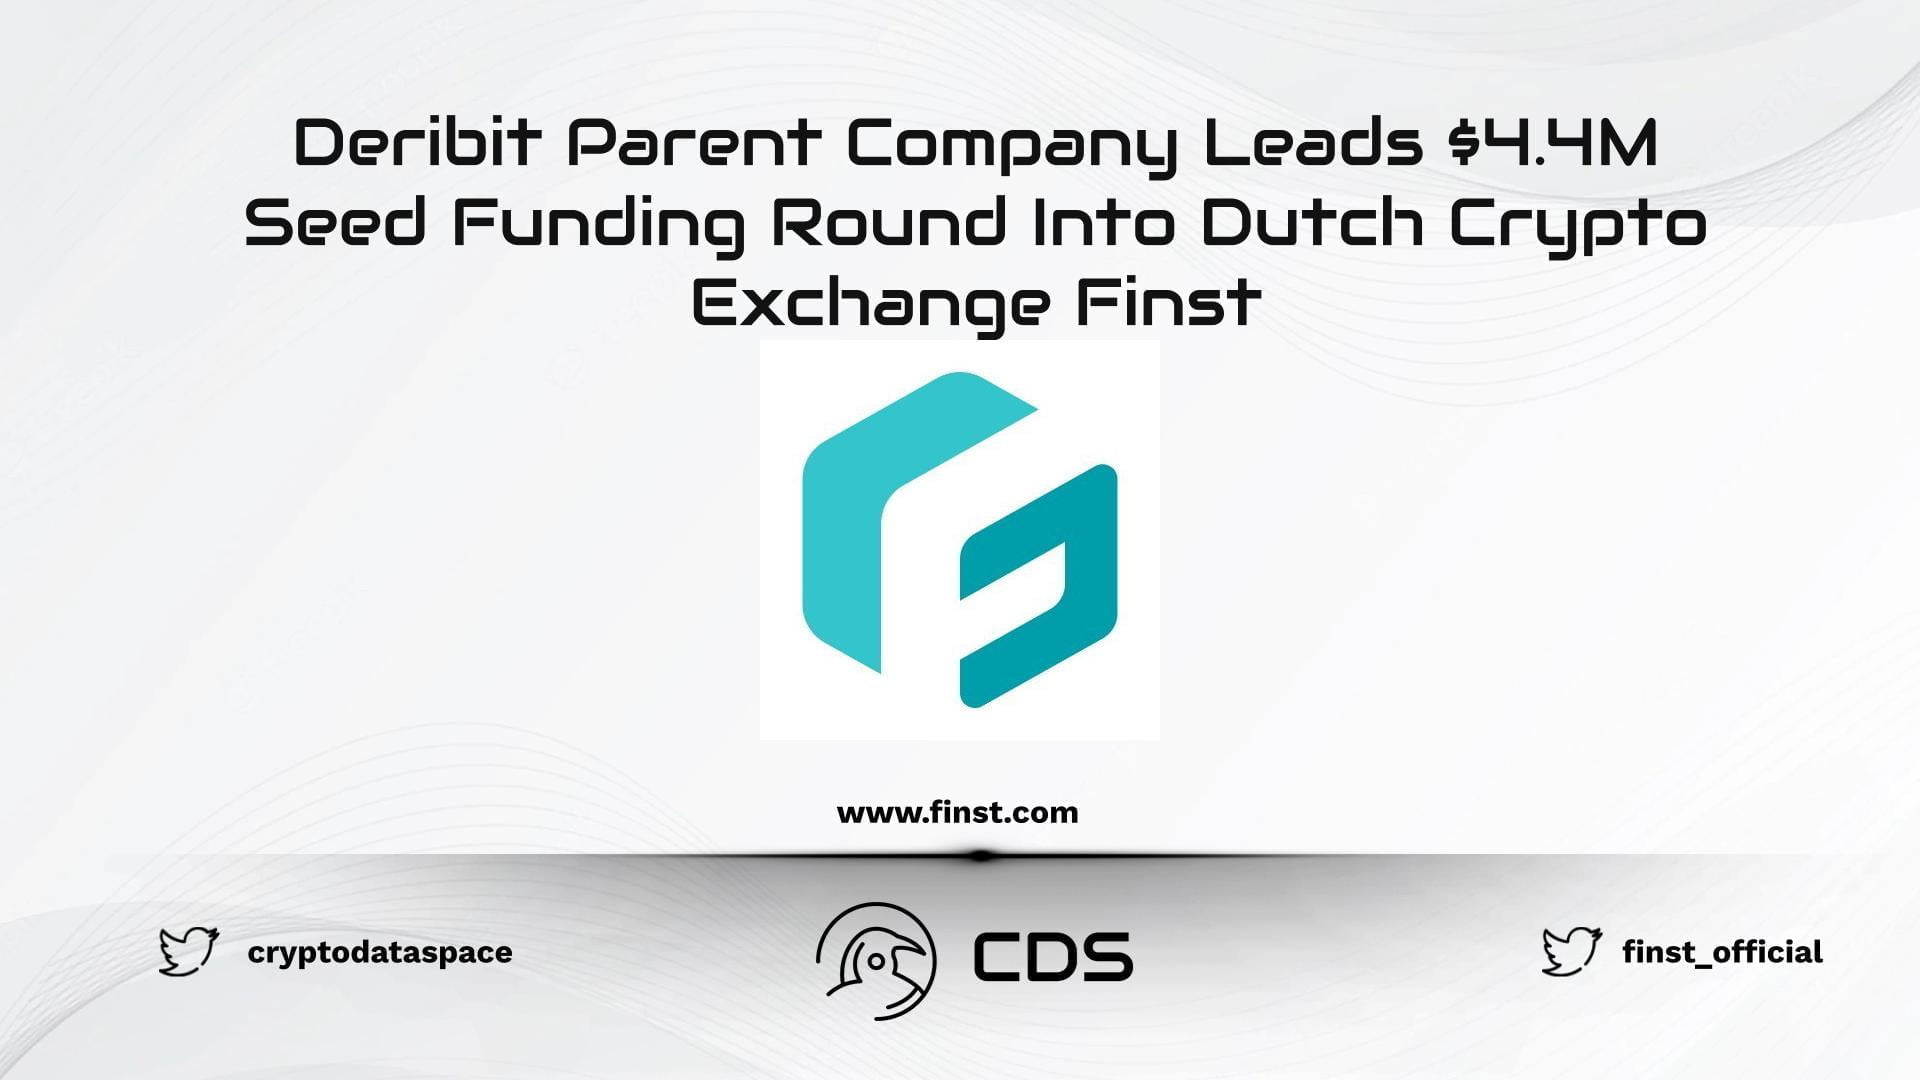 Deribit Parent Company Leads $4.4M Seed Funding Round Into Dutch Crypto Exchange Finst